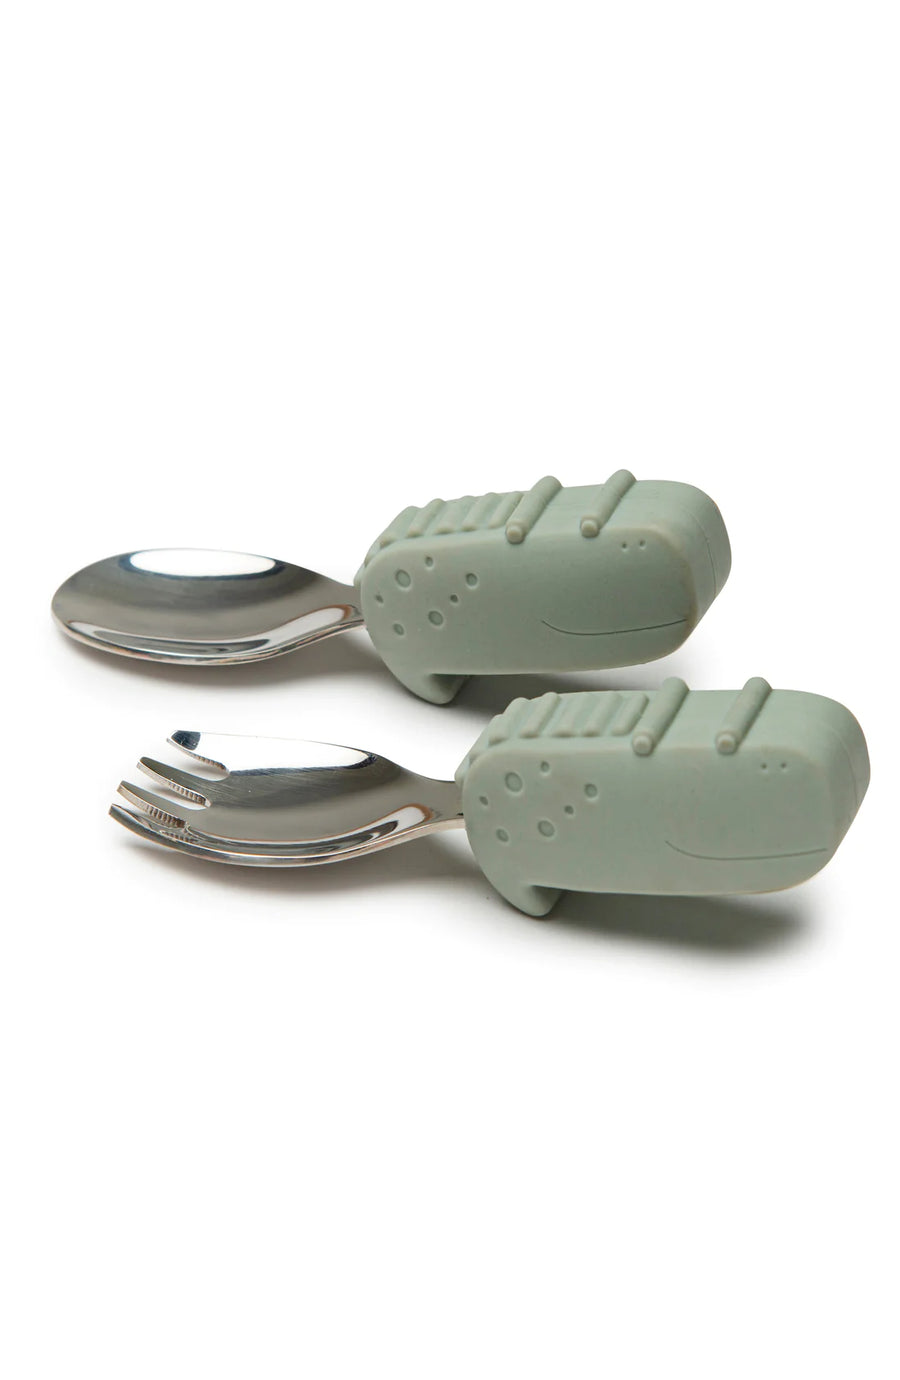 ezpz Tiny Spoon 2 Pack - Buy 2 and Save 10% - August Boutique